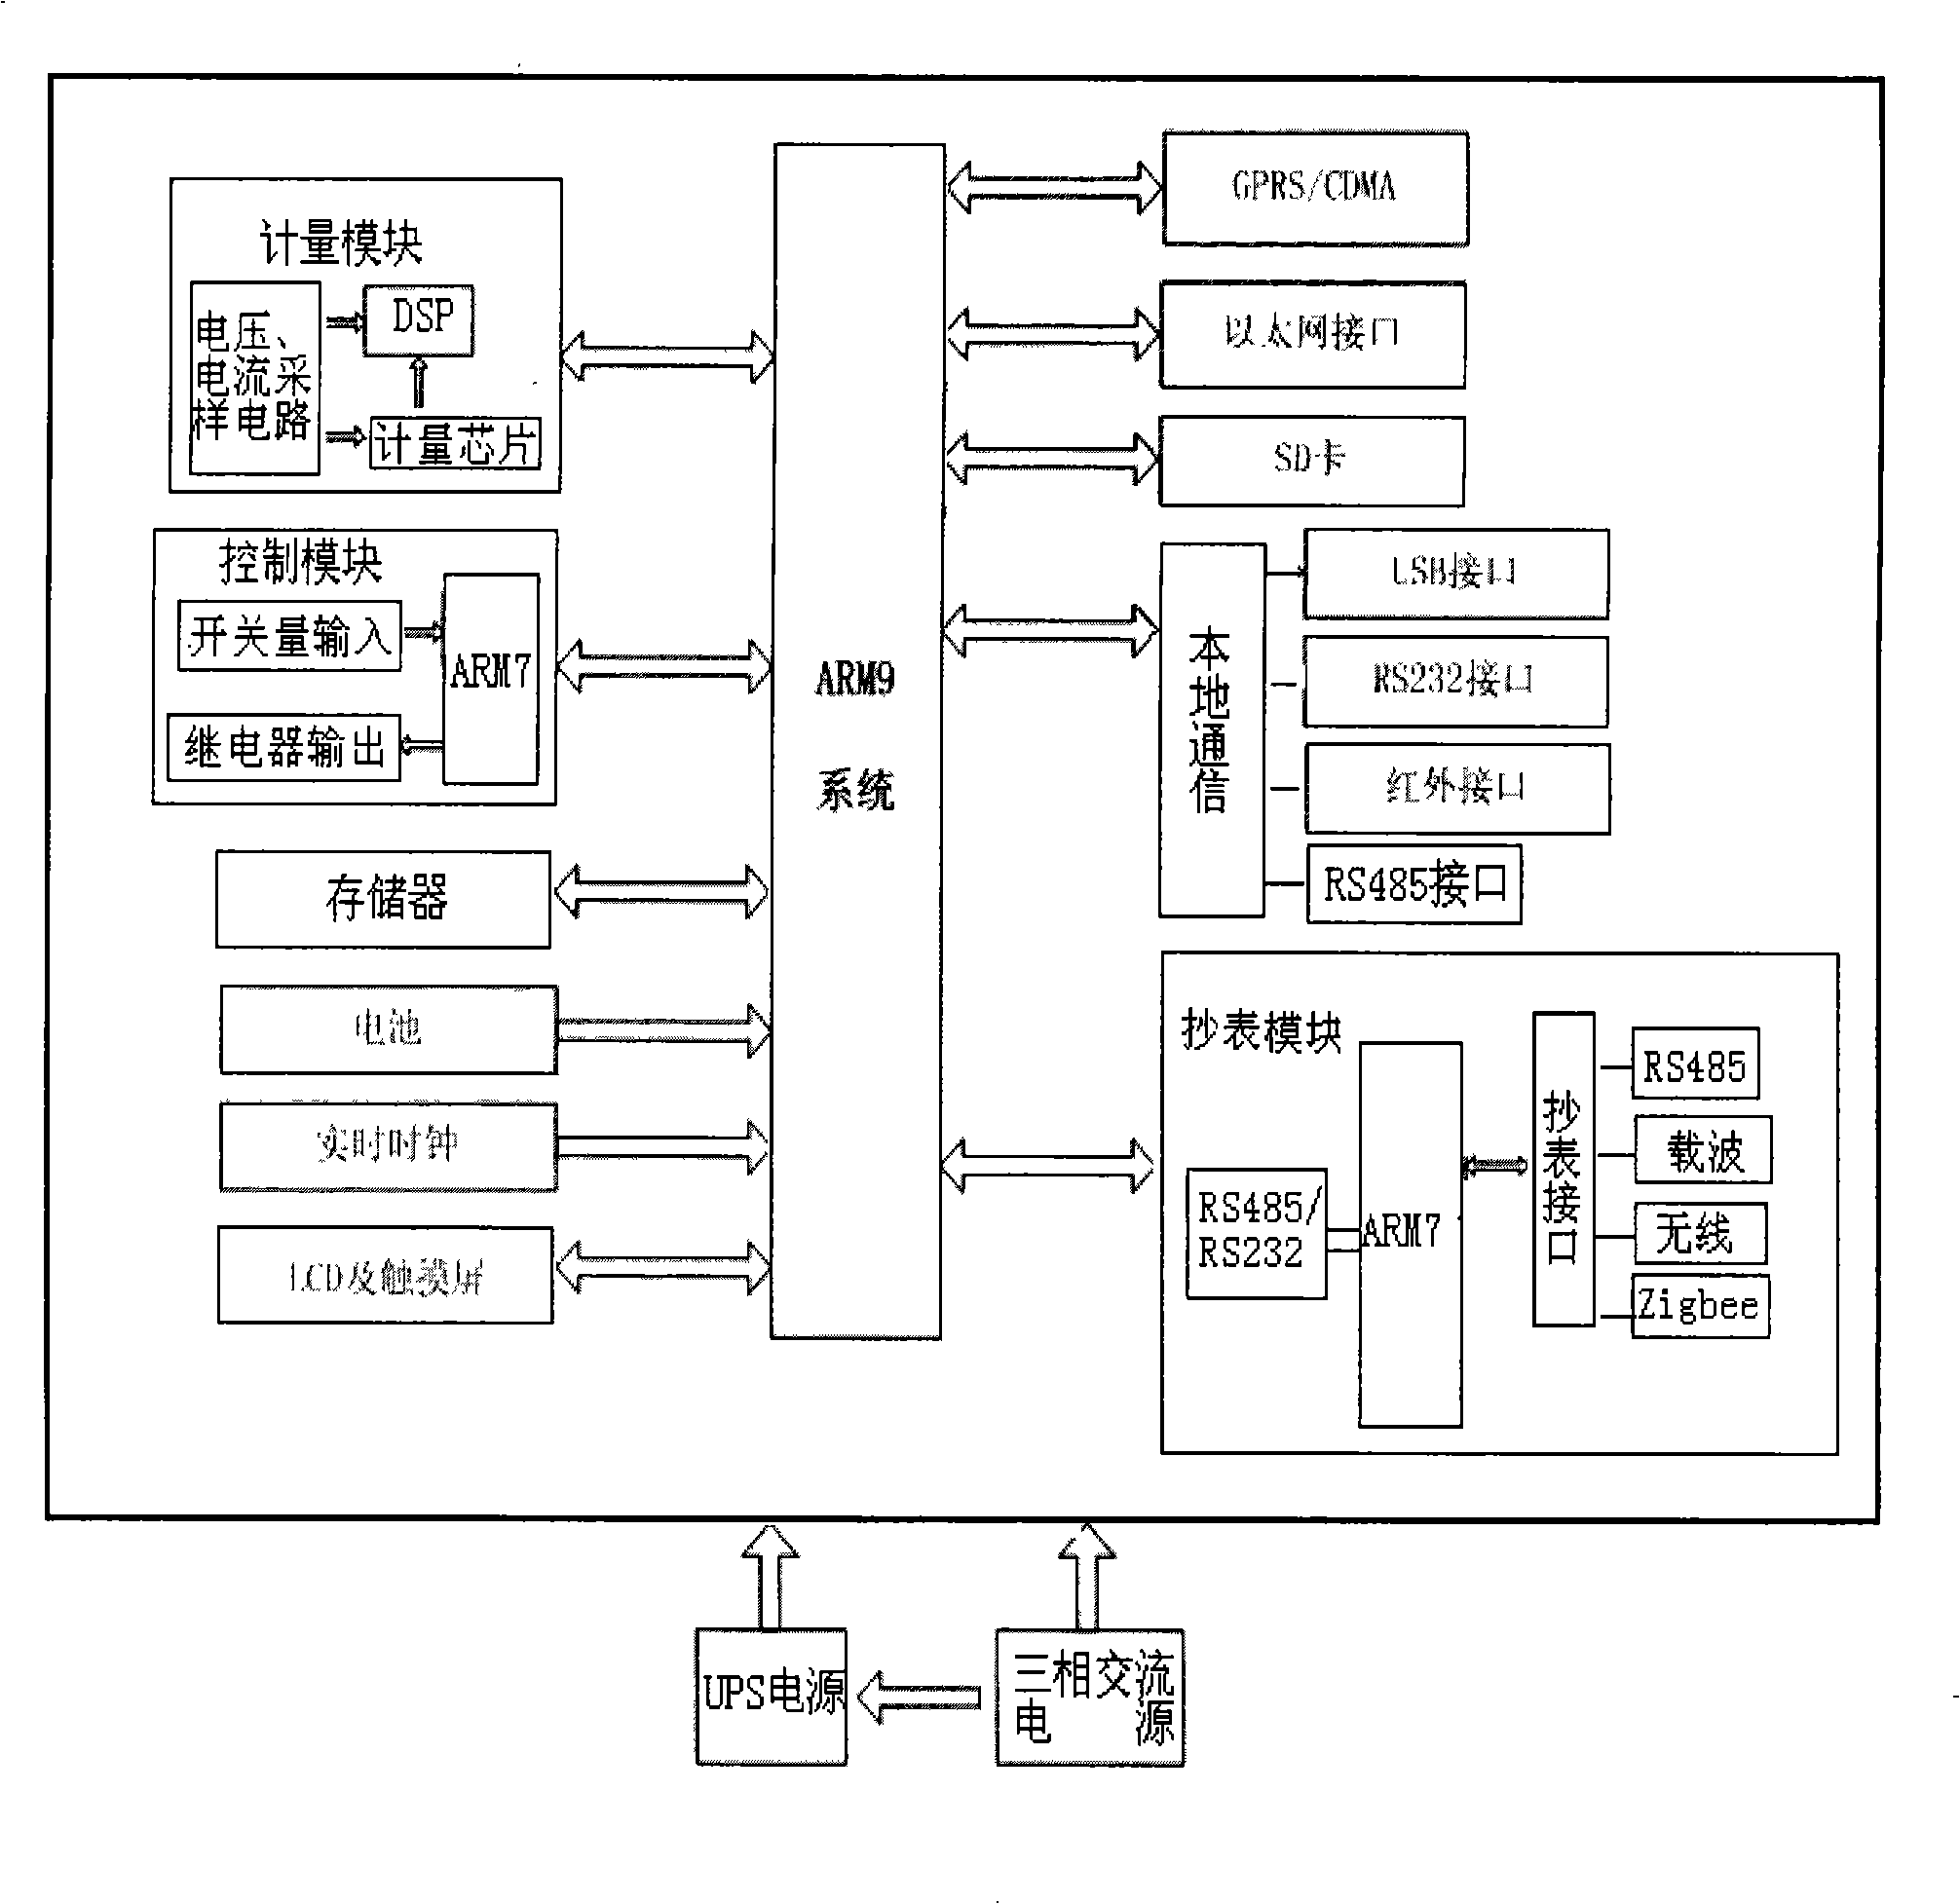 Integrated control system for electricity distributing and metering